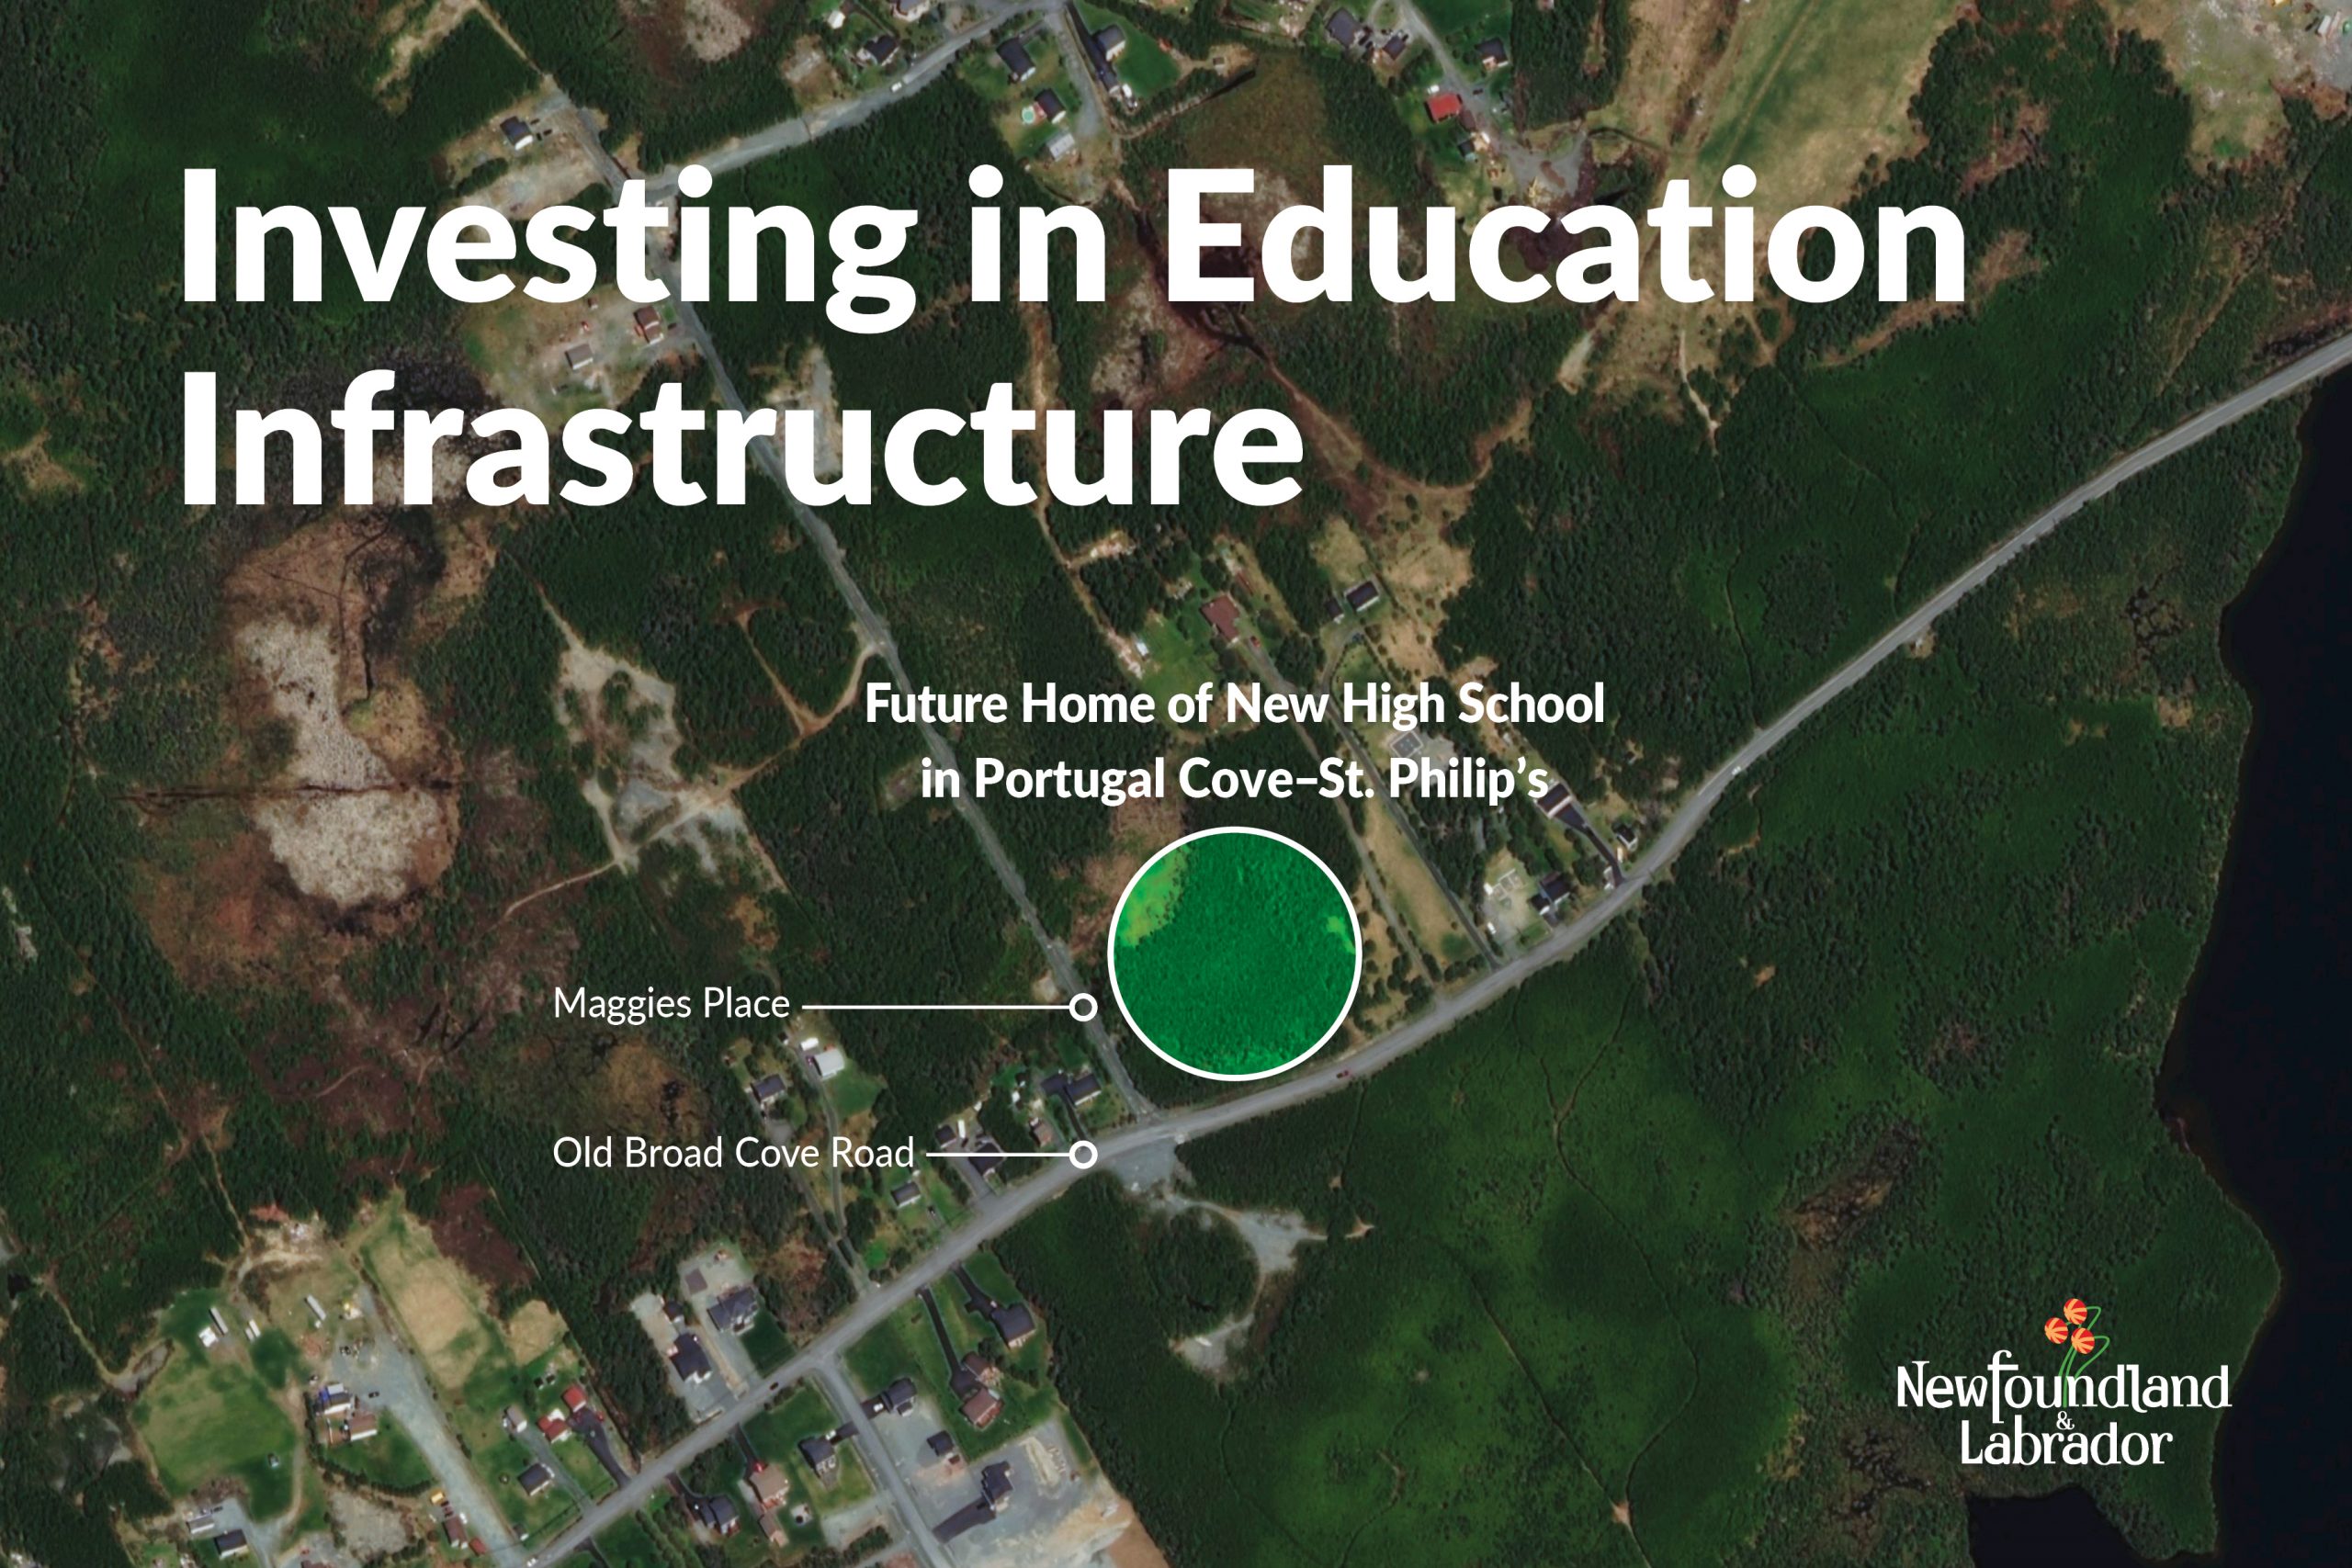 A map depicting the location of the future high school in Portugal Cove-St. Philip's. The text reads investing in Education Infrastructure